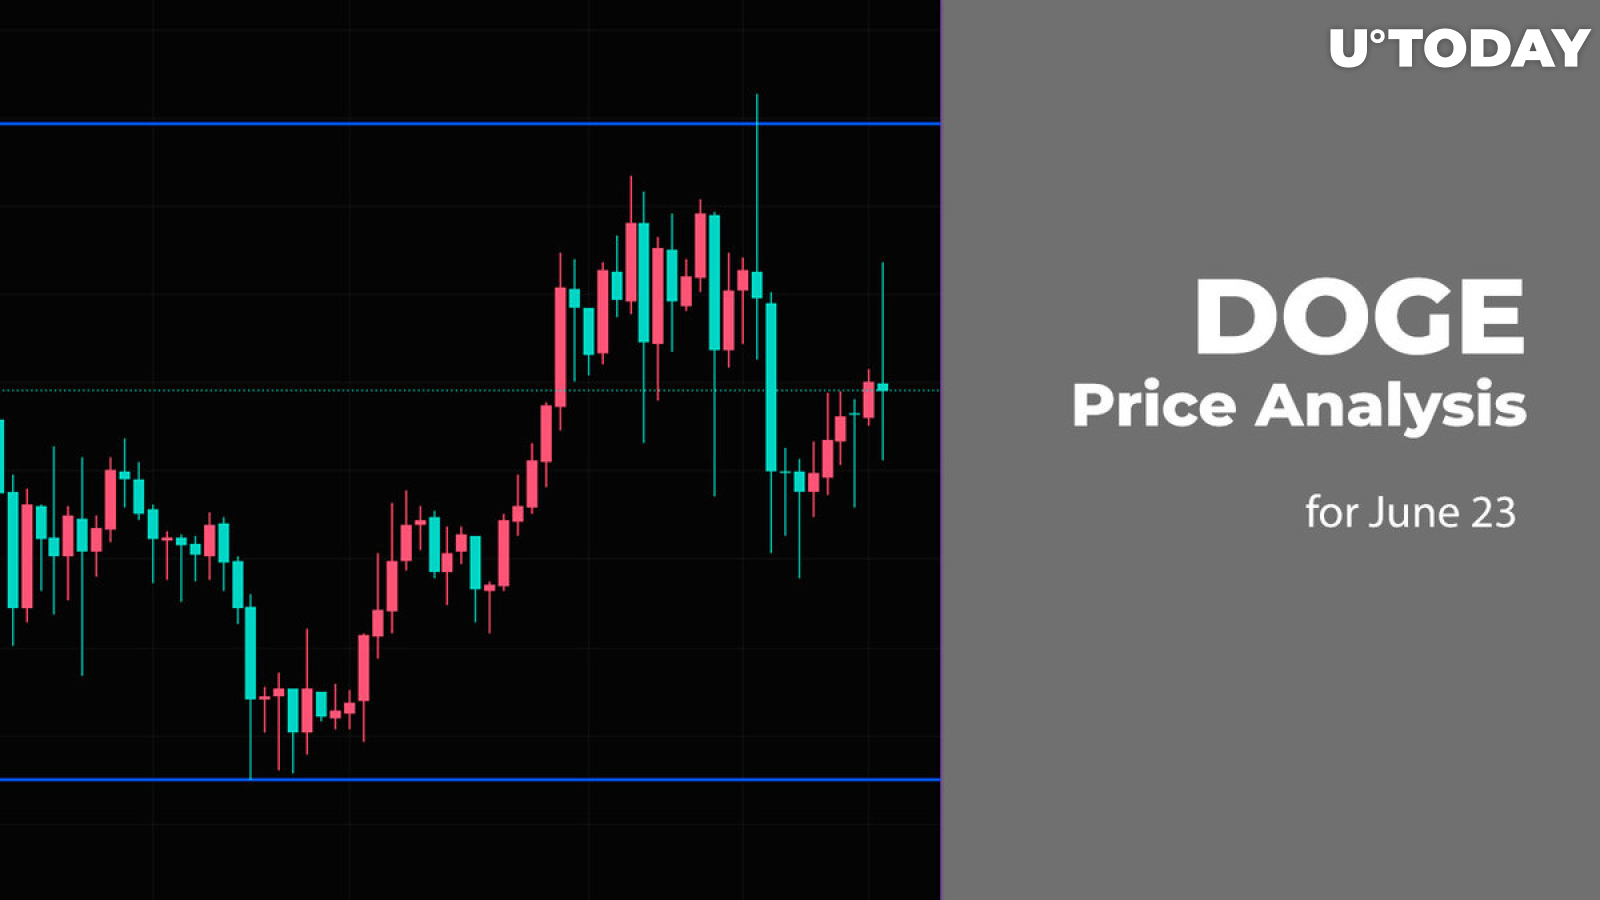 DOGE Price Analysis for June 23